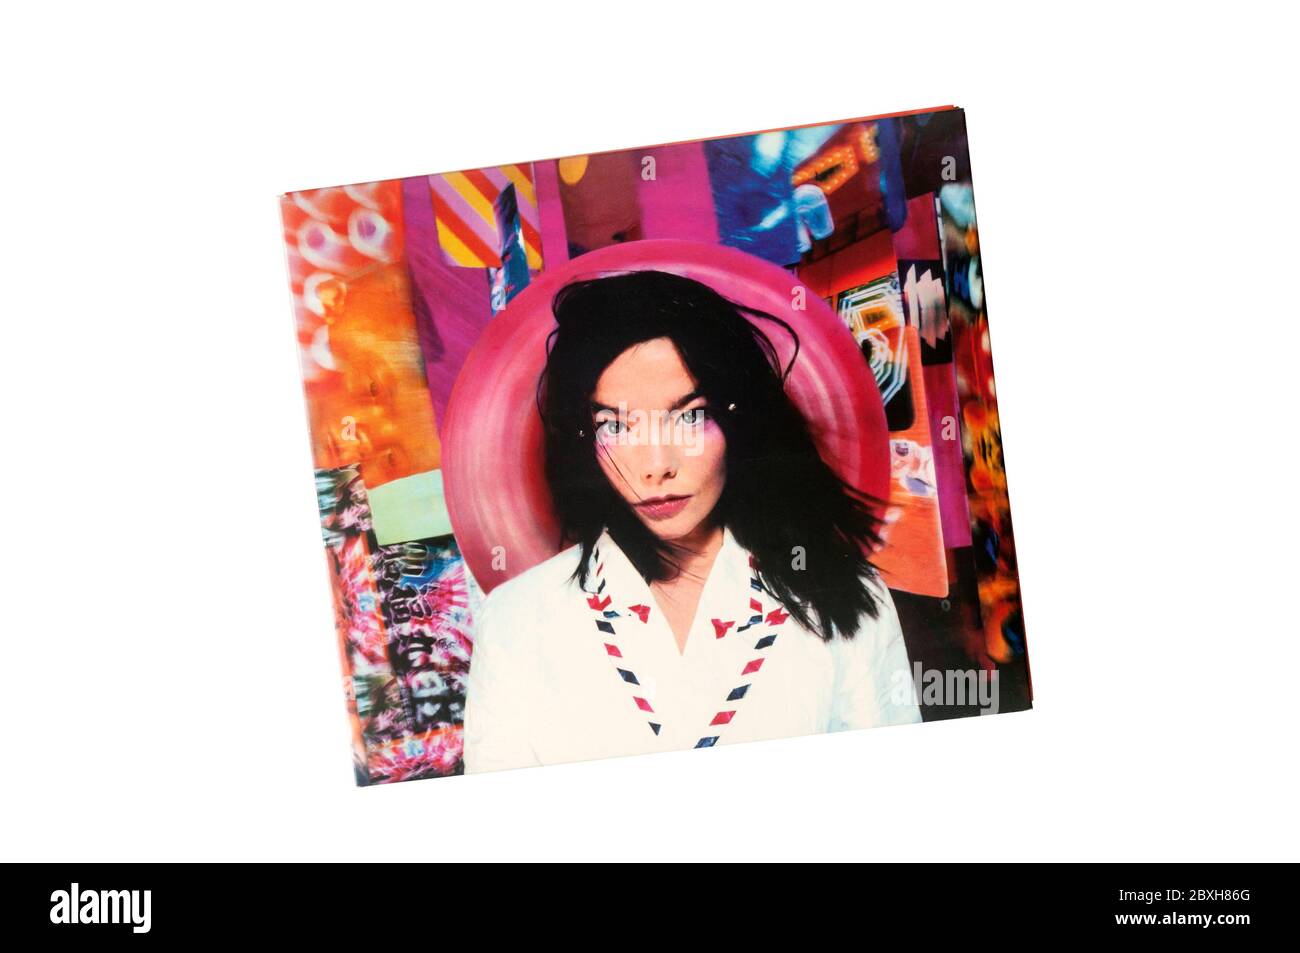 Post was the second studio album by Bjork.  It was released in 1995. Stock Photo